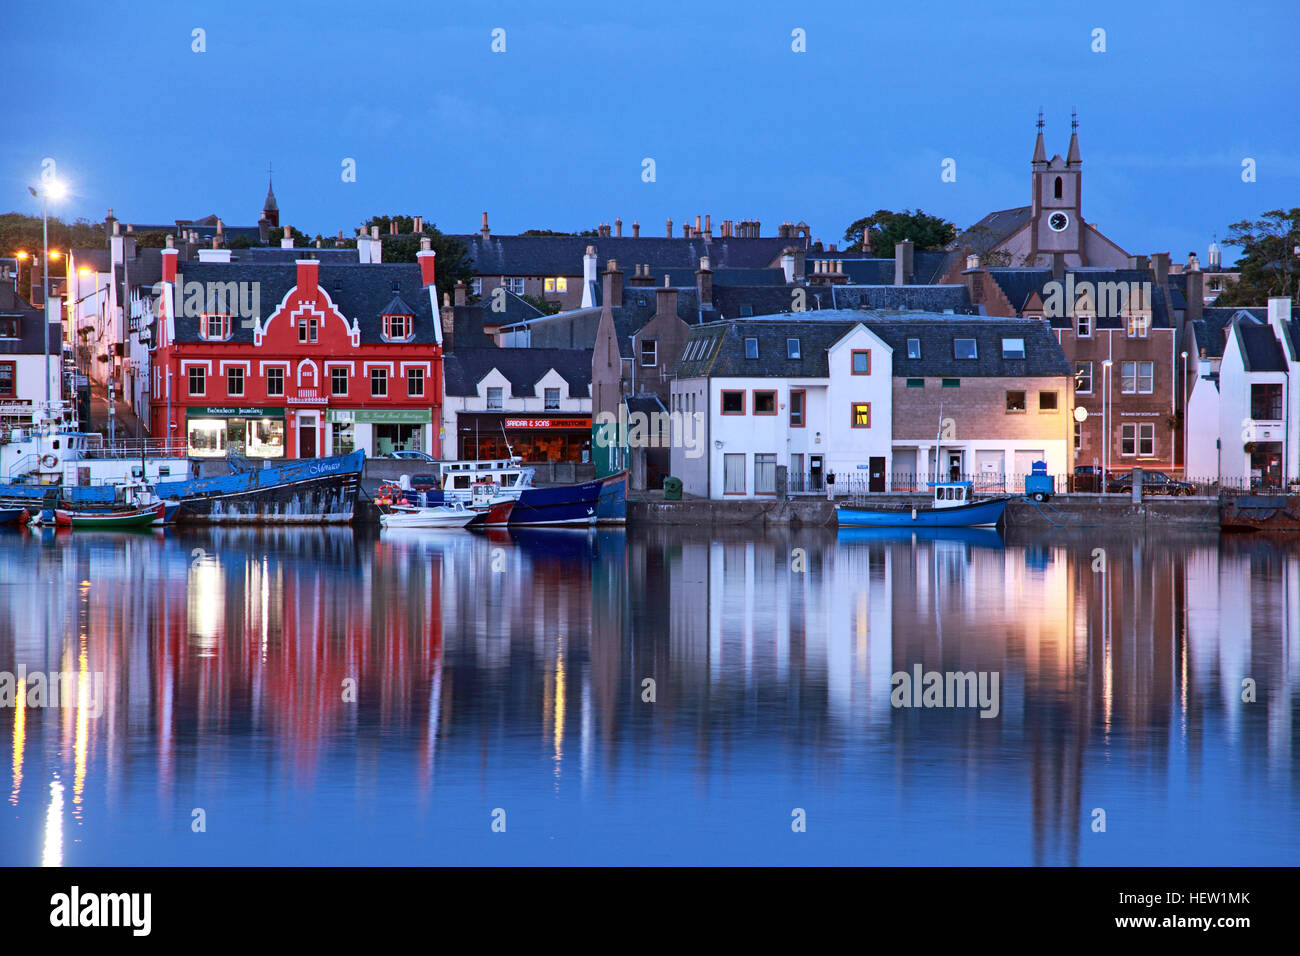 Stornoway, capital of the Isle Of Lewis, historic harbour, with boats, fishing vessels and cottages, at dusk Stock Photo